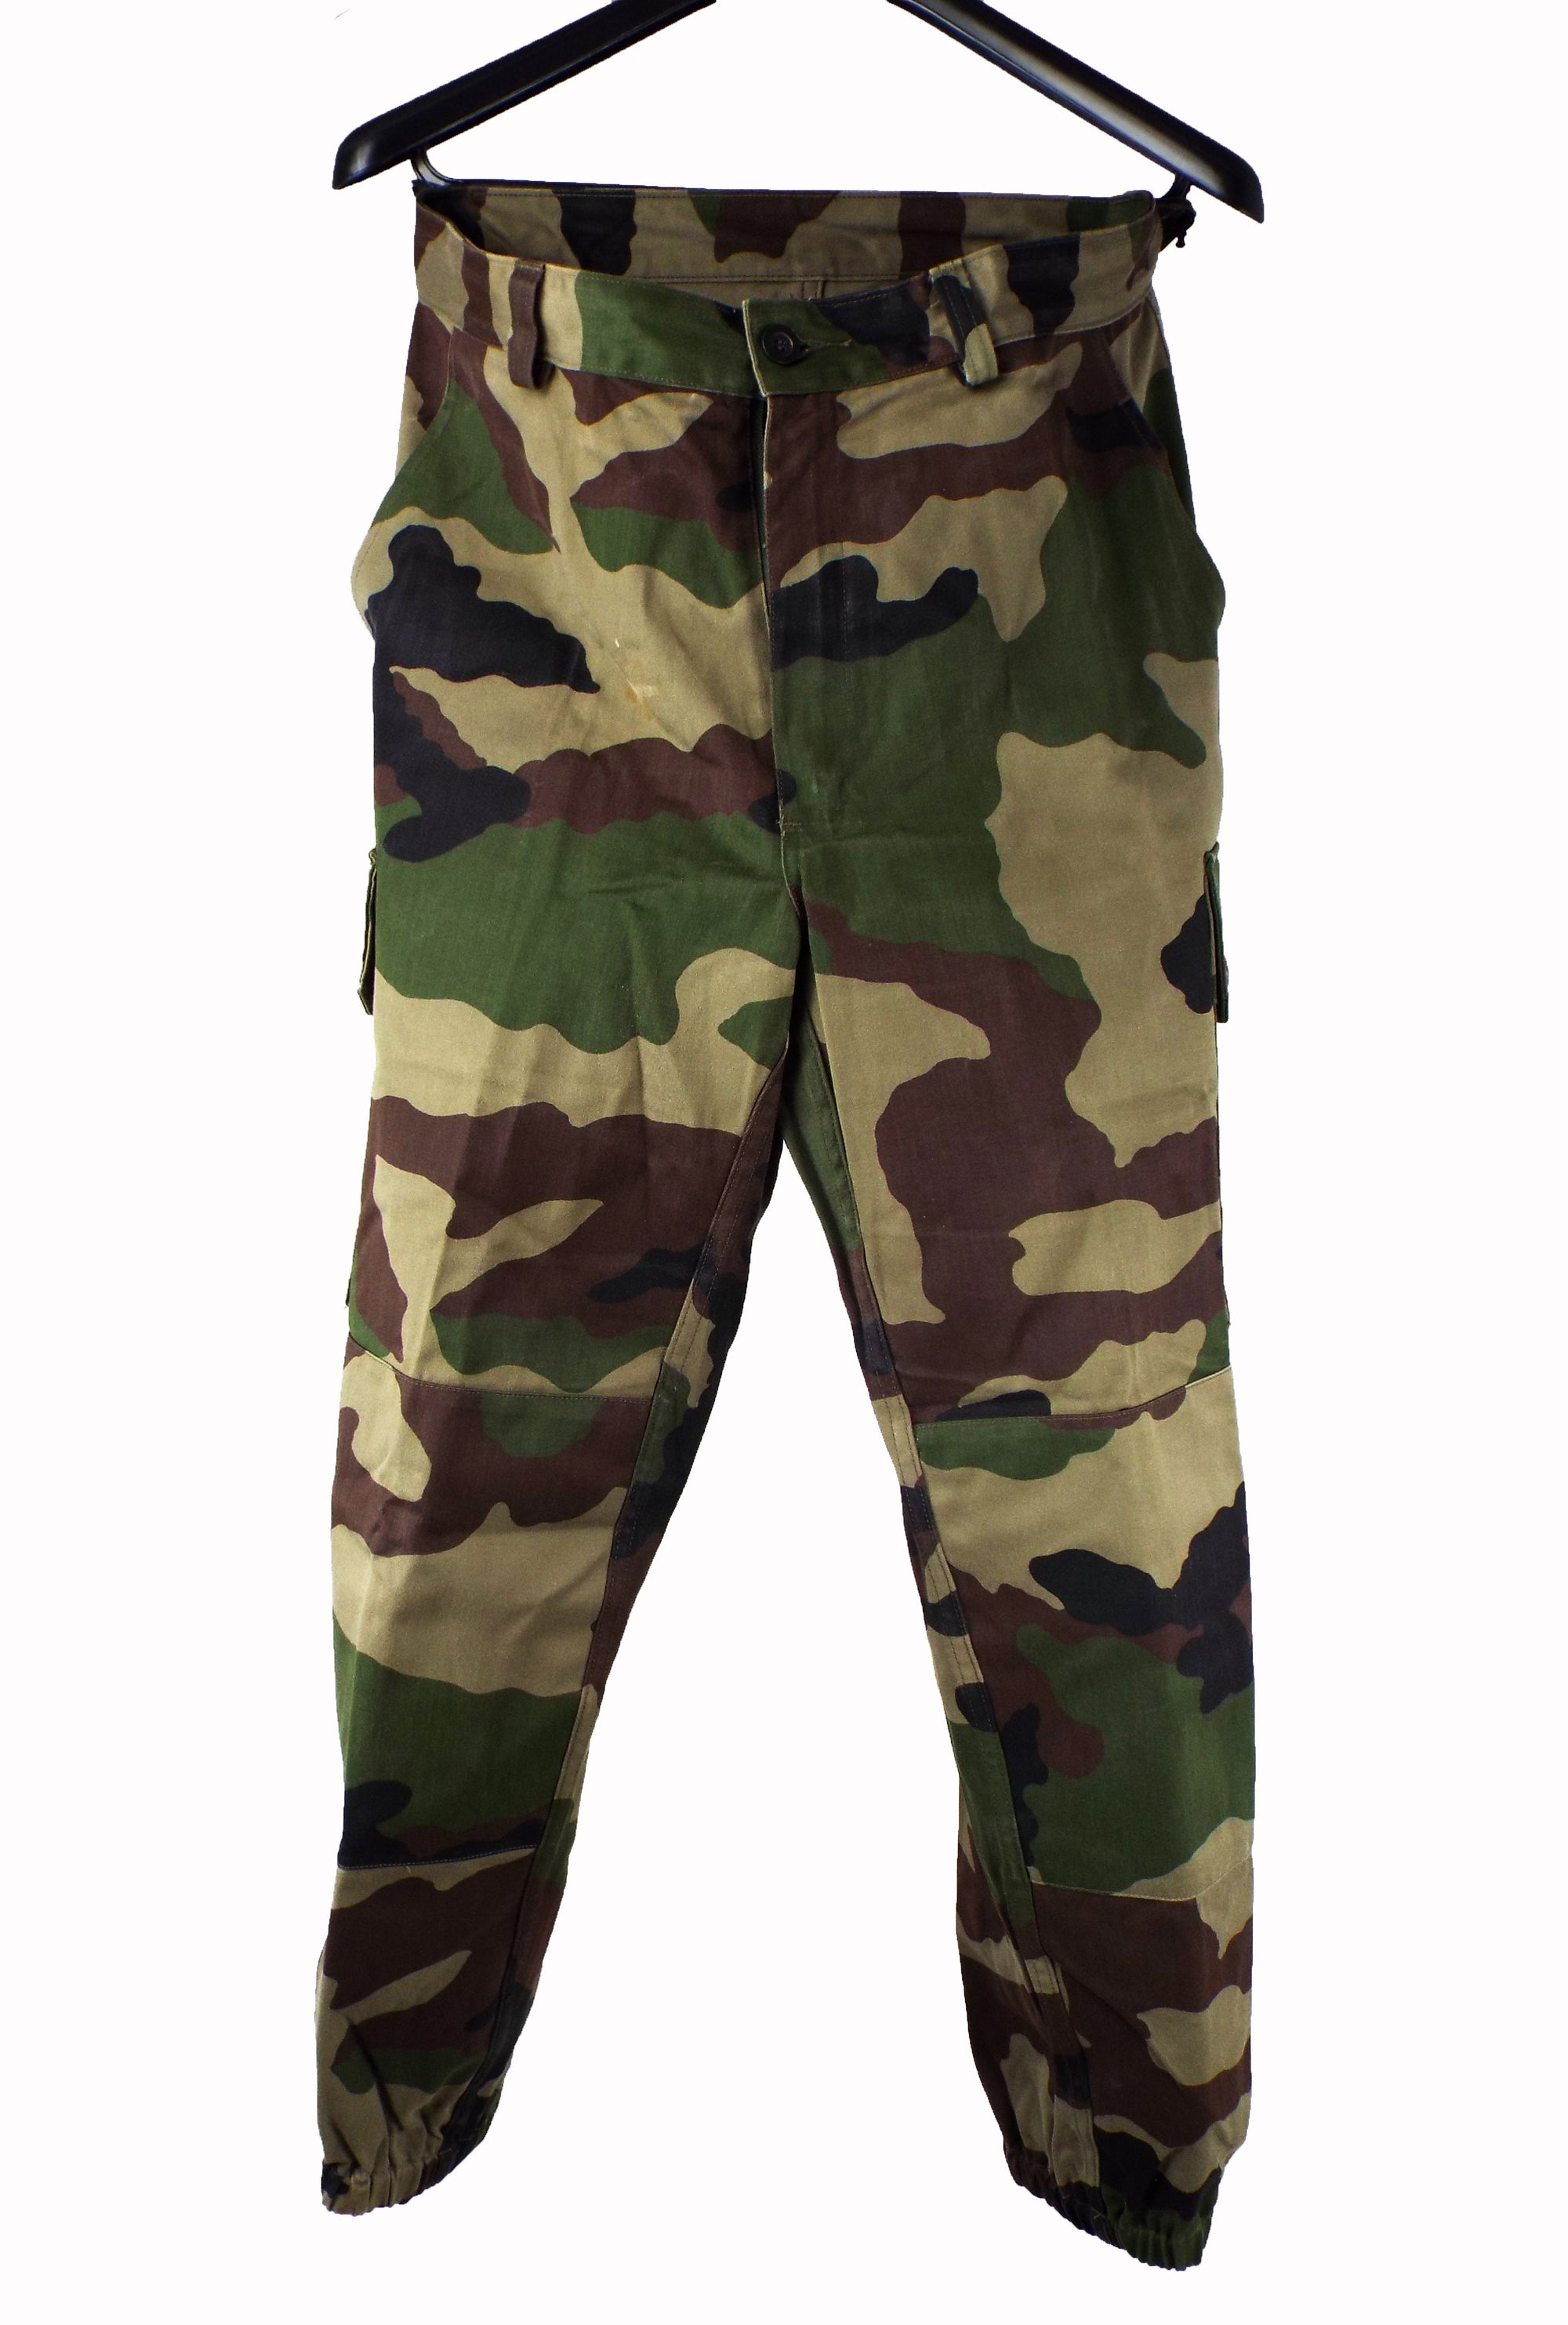 French Army CCE Camo Combat Trousers - Poly/Cotton - Grade 1